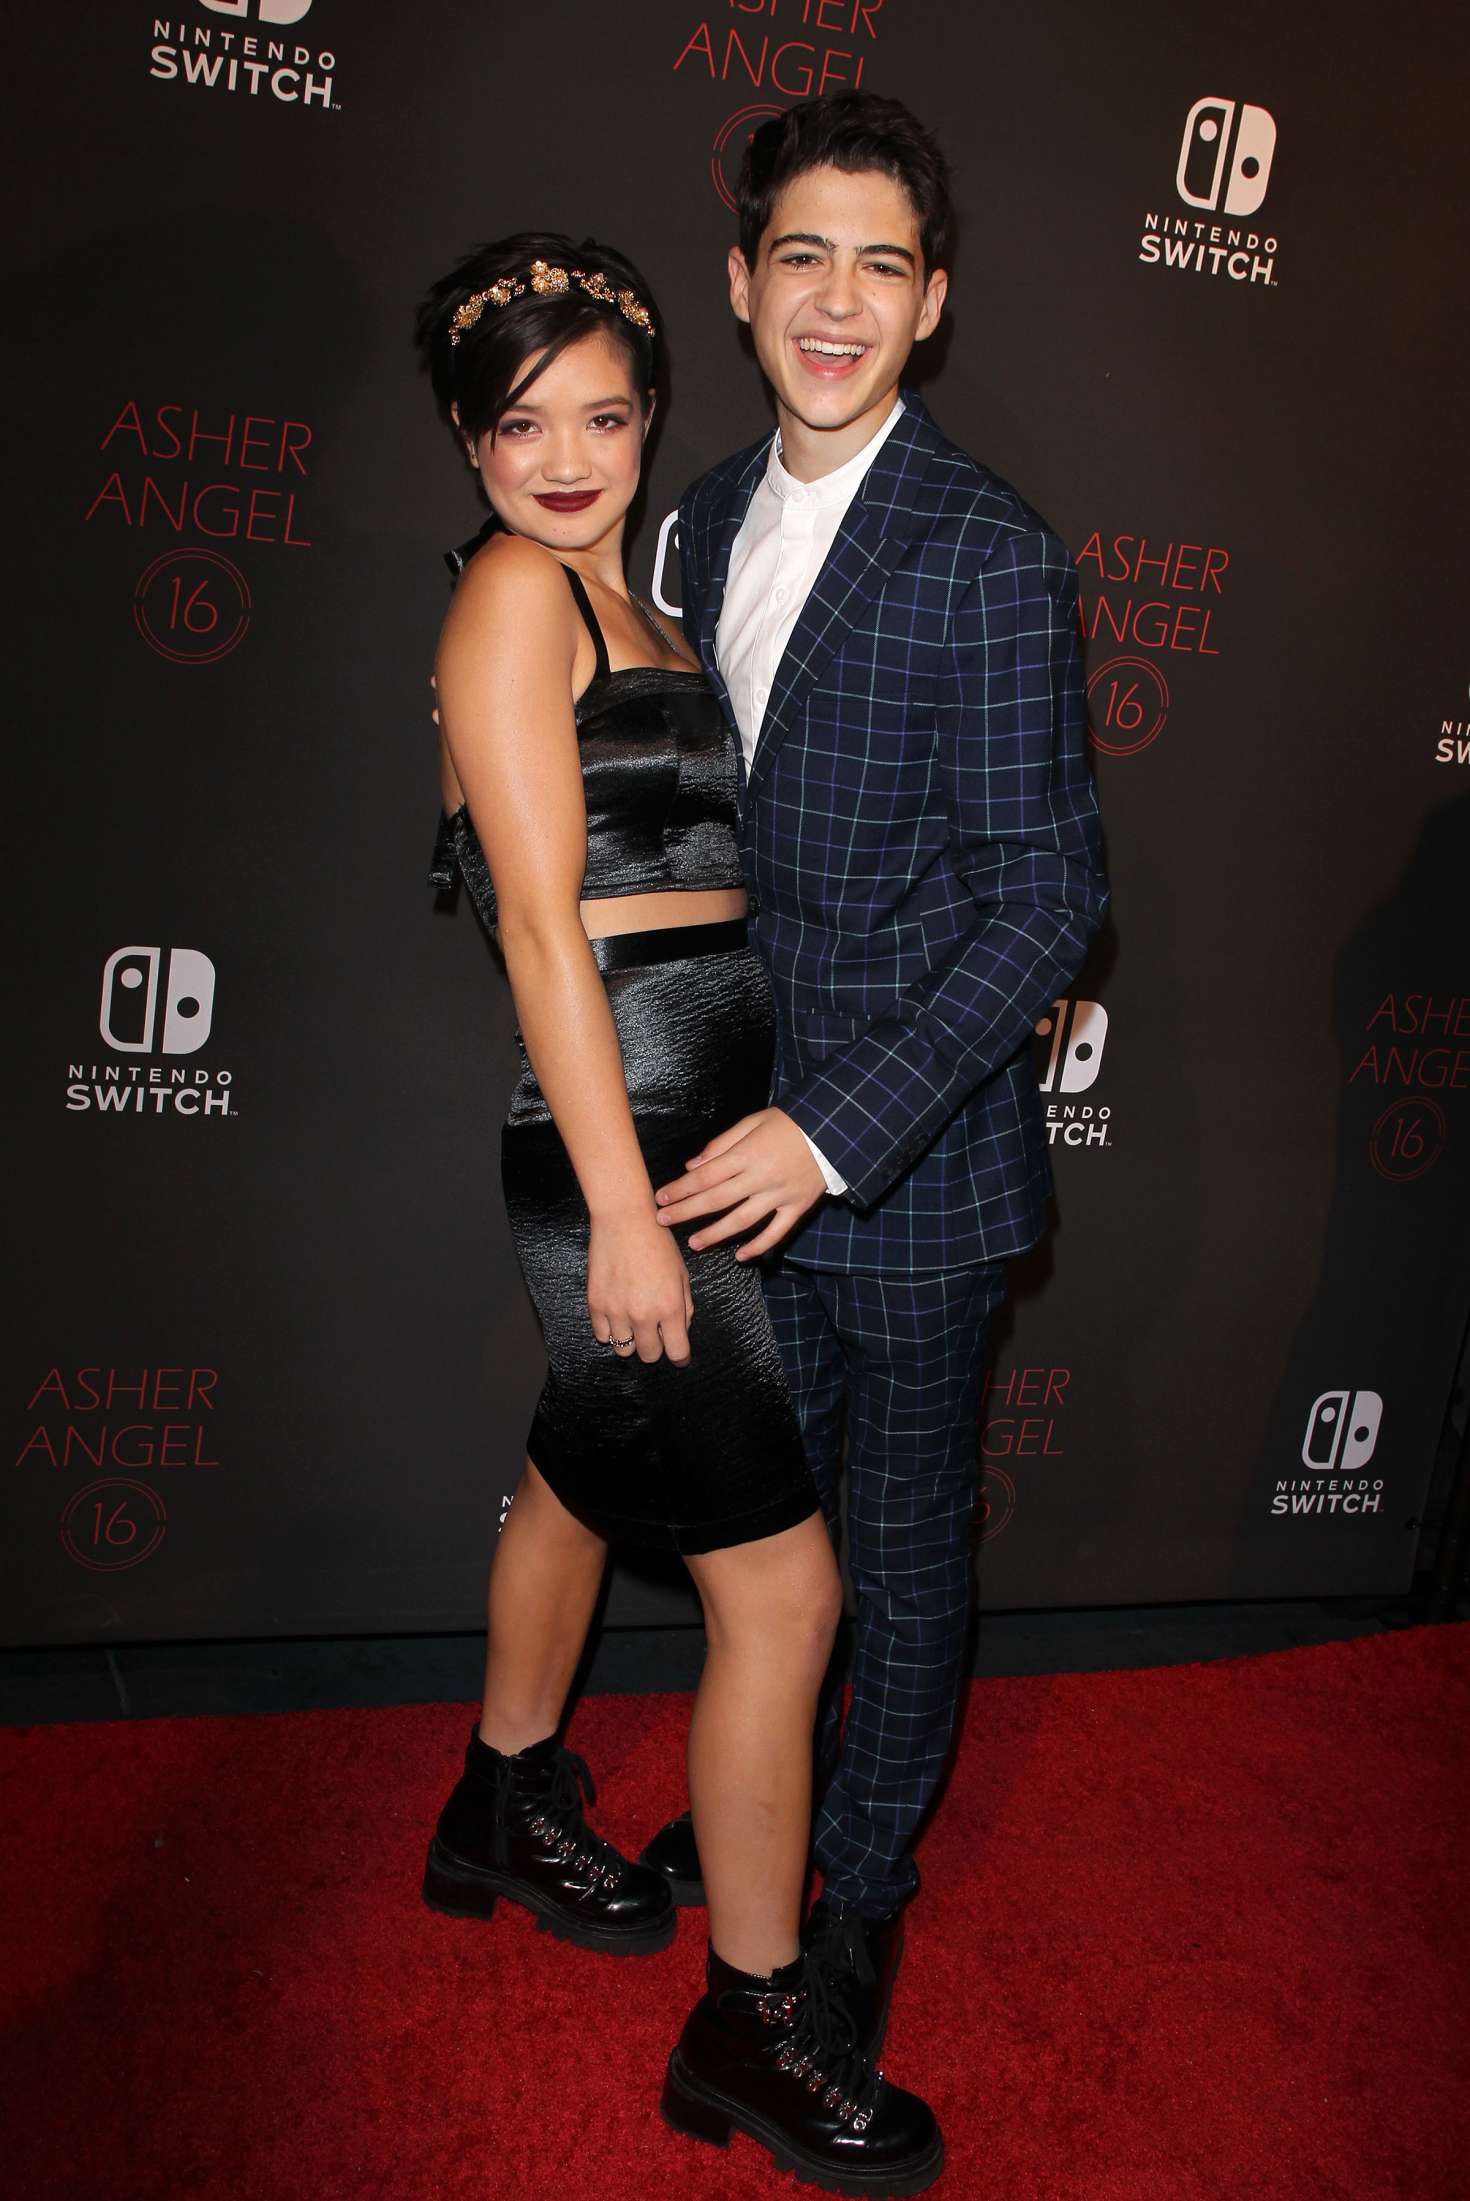 Mount And Blade: Peyton Elizabeth Lee And Asher Angel